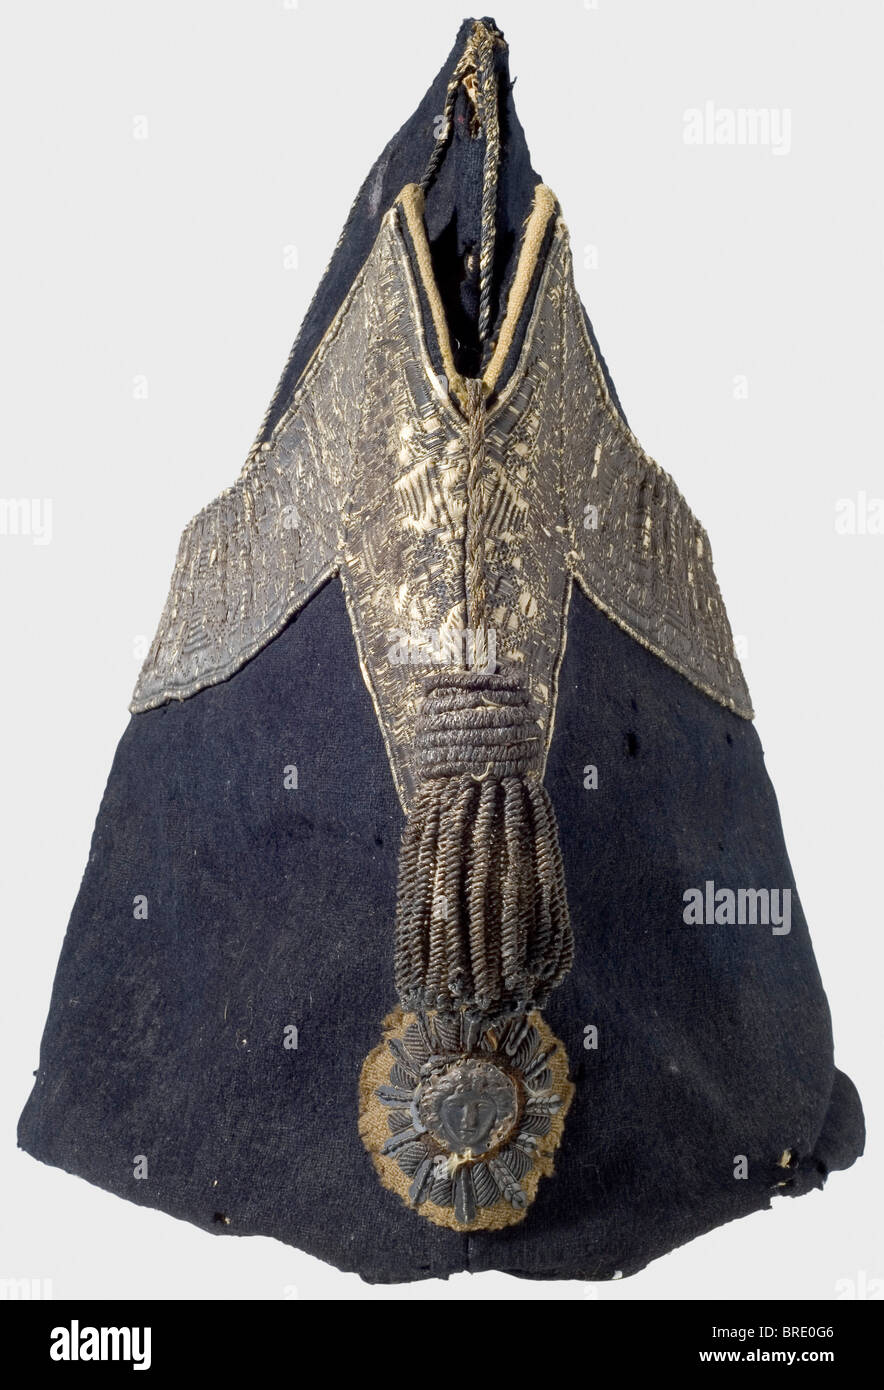 A garrison cap for enlisted men of the Gardes de Corps du Roi, as worn after 1814 Cap of dark blue cloth with silver braid lace, an attached spun silver tassel, and an embroidered emblem bearing the Medusa head. The interior lined with leather, and bearing an old 'Collection André Thélot' label, with the hand-written description, 'Bonnet de Police des Gardes du Corps Compagnie de Luxembourg Maison du Roi 1815'. The cloth shows insect damage in places. The braid is rubbed and darkened. The leather lining shows marks of wear. Height 22 cm. Interesting example of , Stock Photo